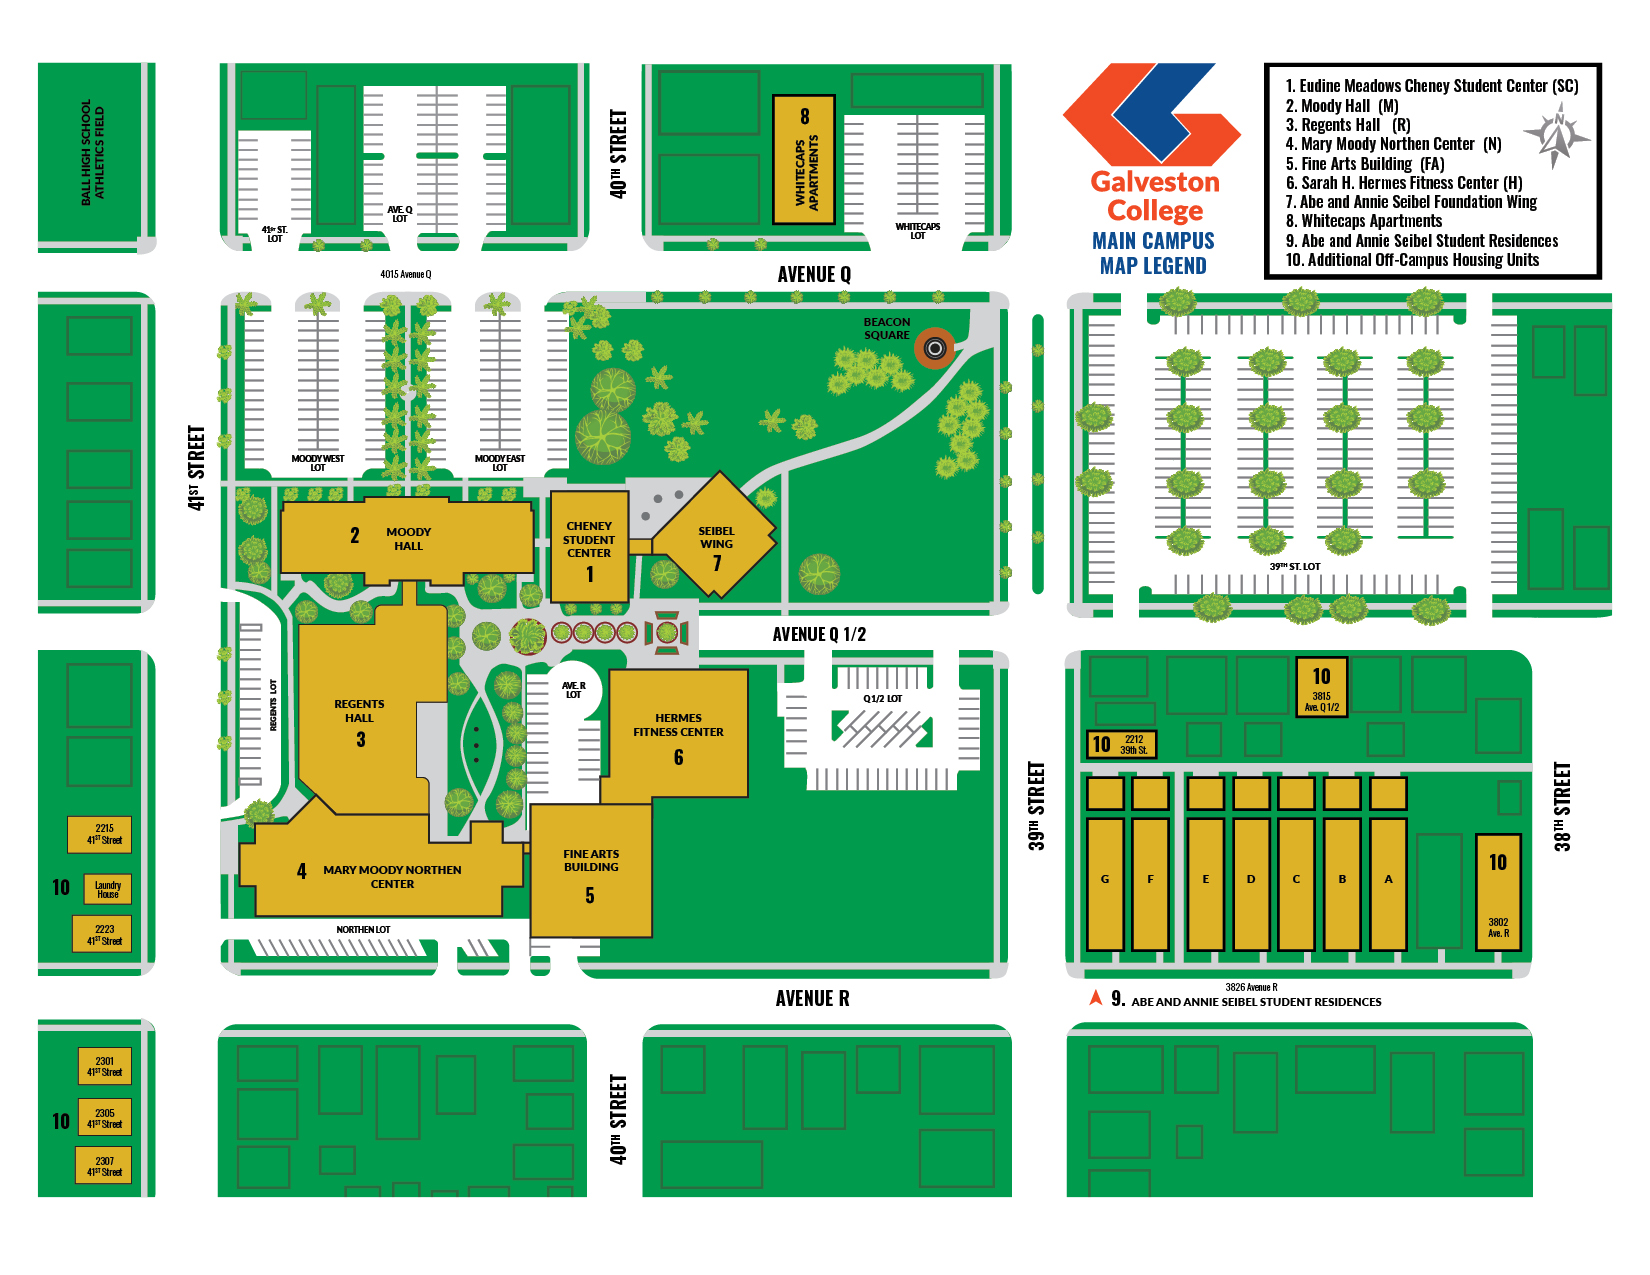 Galveston College Main Campus Maps with Student Housing